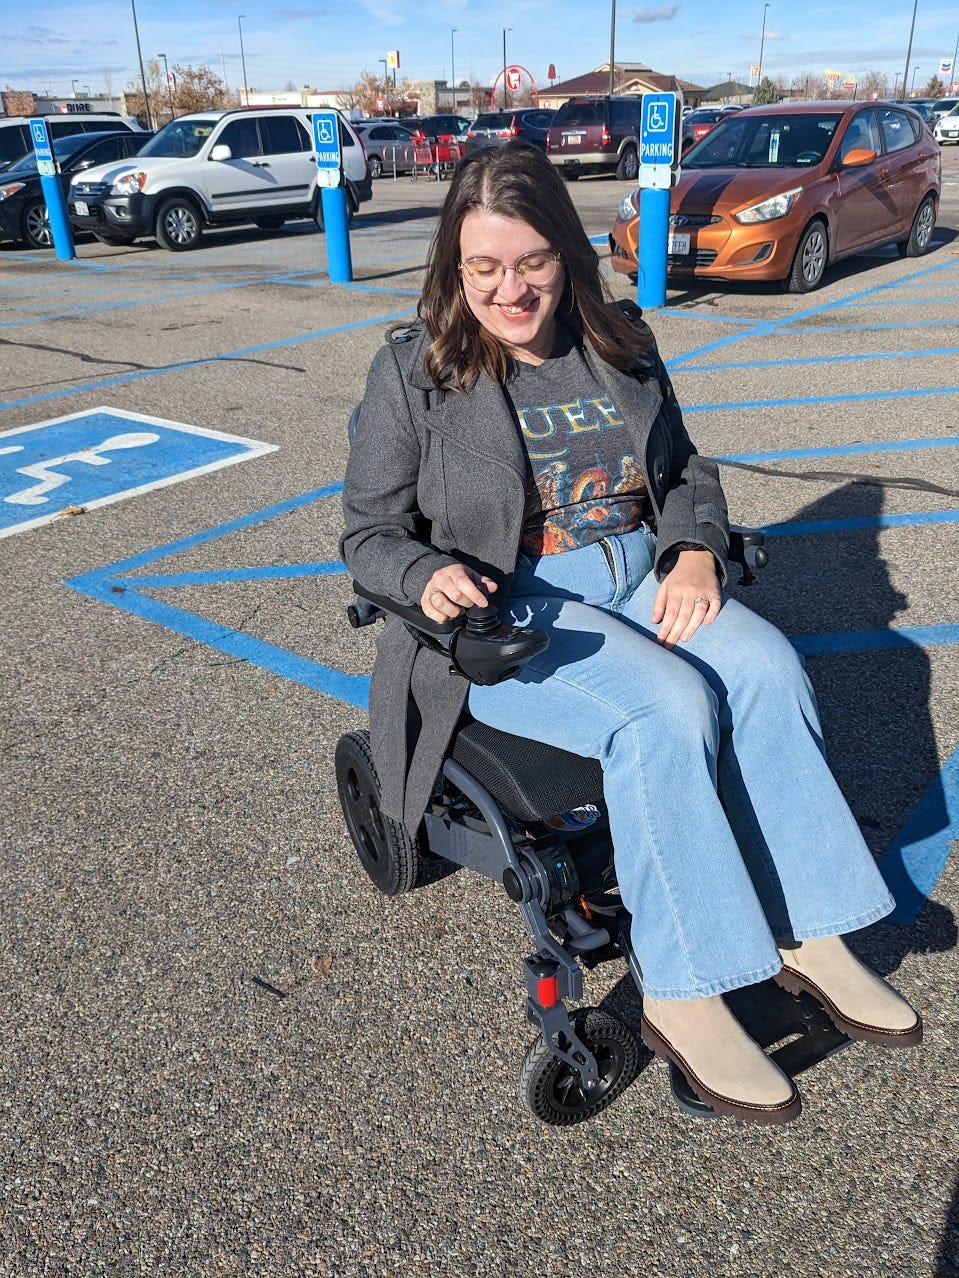 Tessa, a white woman with brown hair wearing jeans, a Queen band tee, and a gray jacket, smiles while sitting in an electric wheelchair. She is in a parking lot, accessible parking spaces are visible in the background.